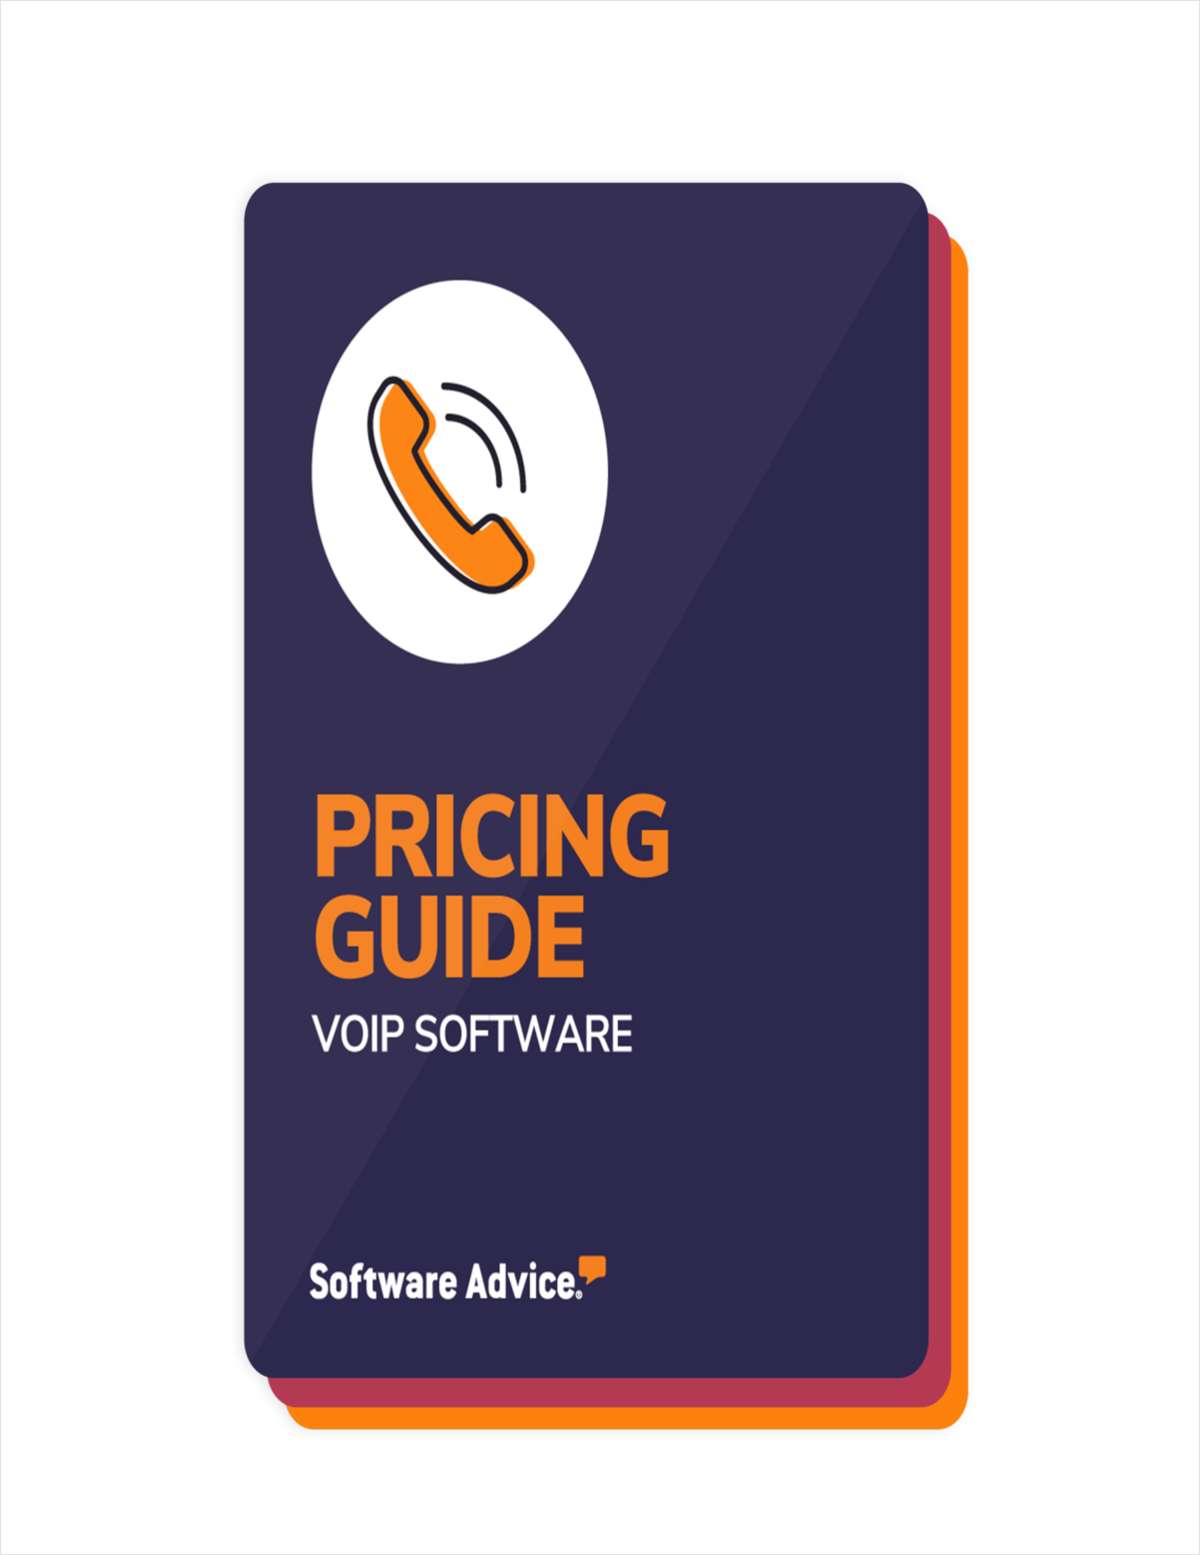 Don't Overpay: What to Know About VoIP Software Prices in 2022